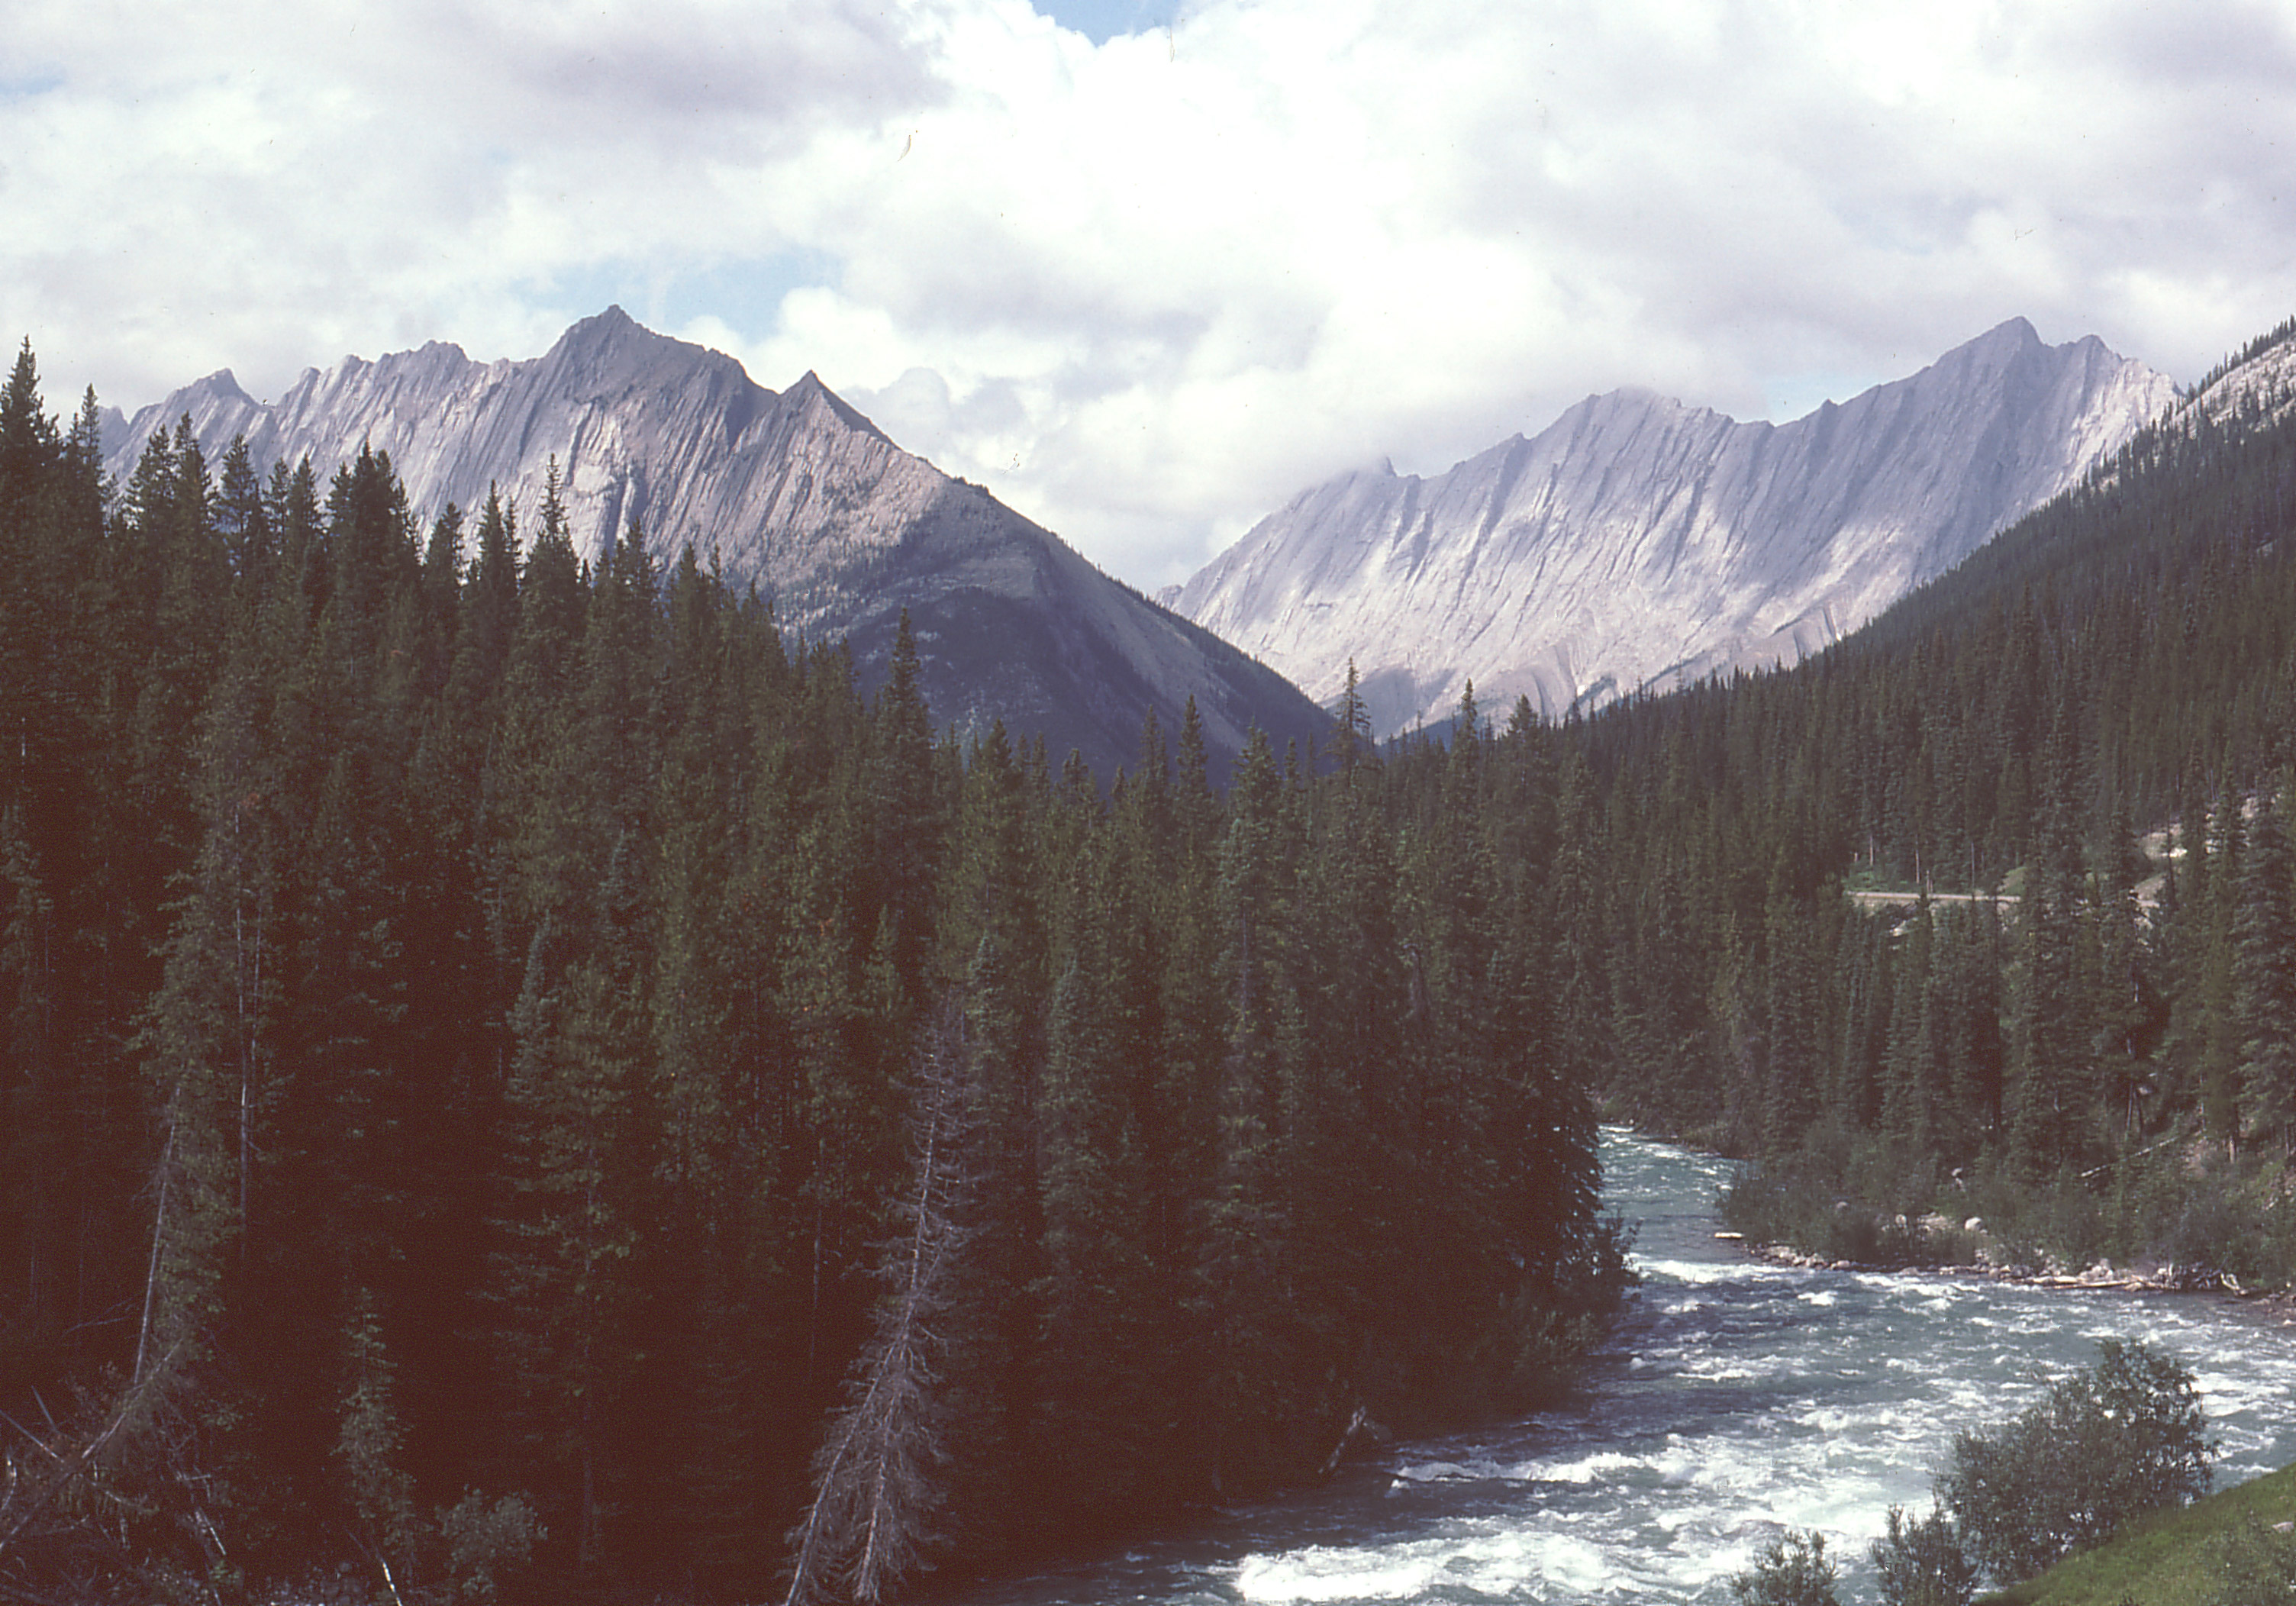 Alberta Mountain forests